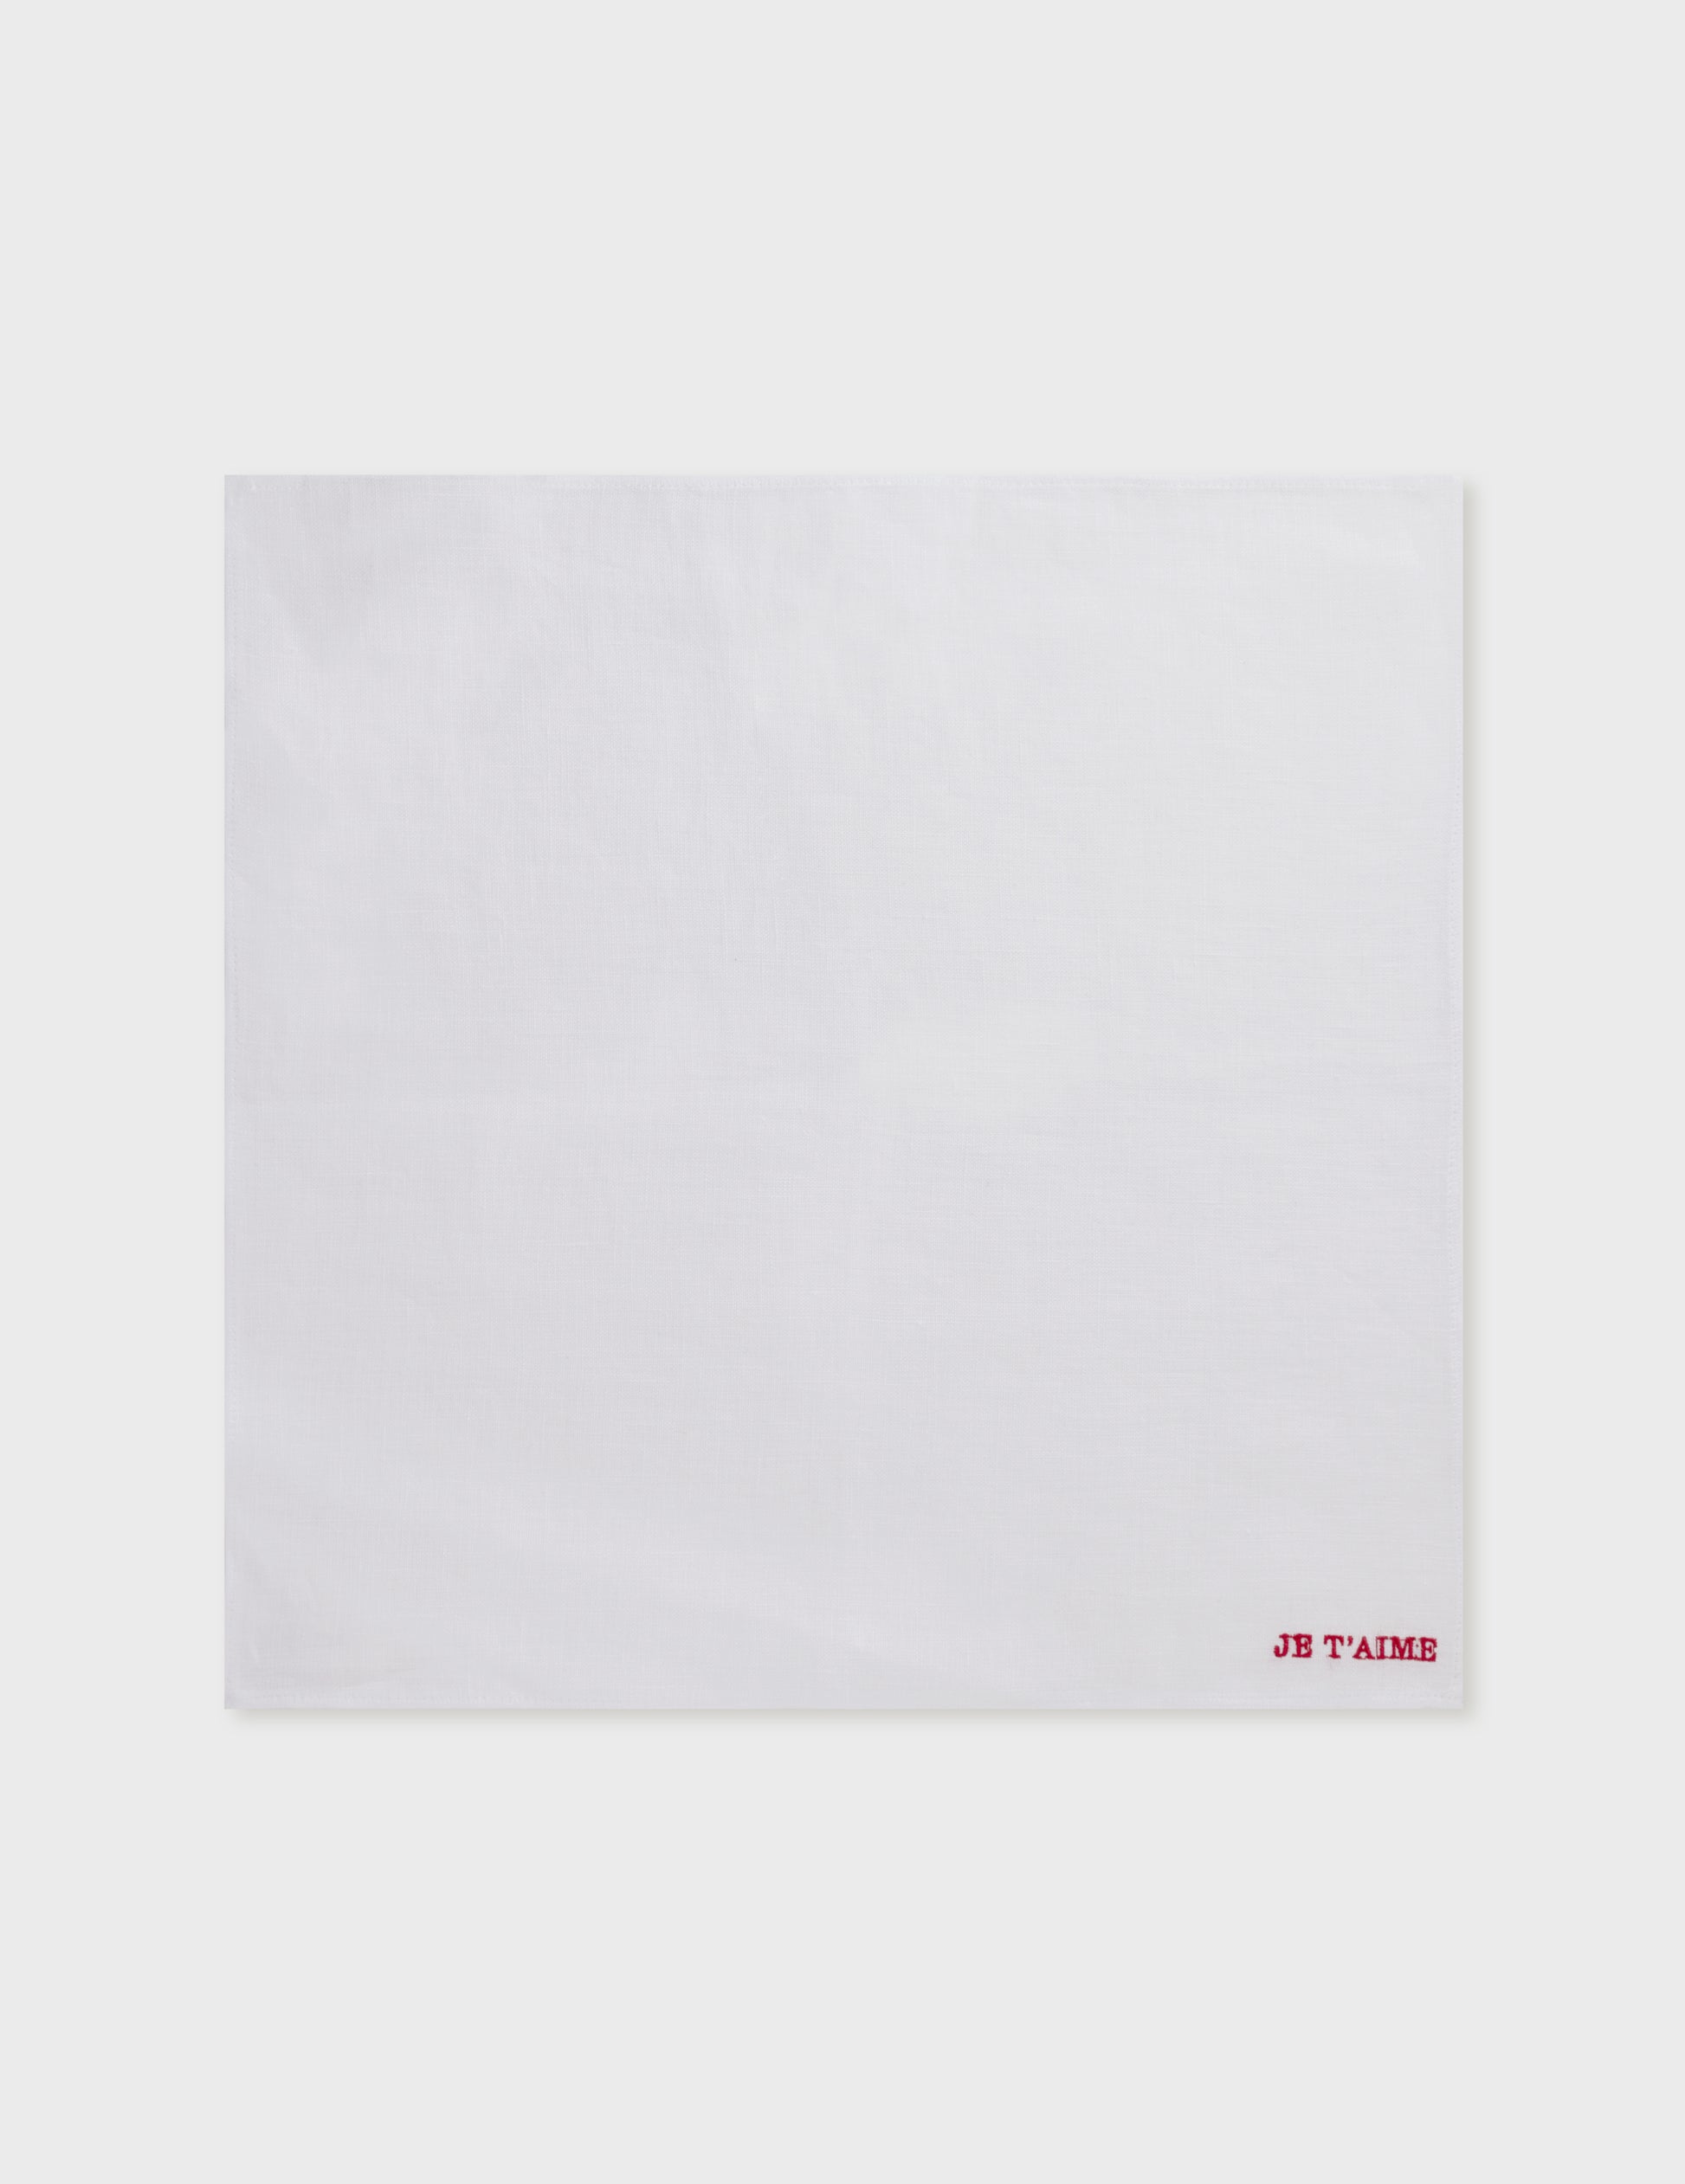 "JE T'AIME" WHITE EMBROIDERED RED POCKET SQUARE